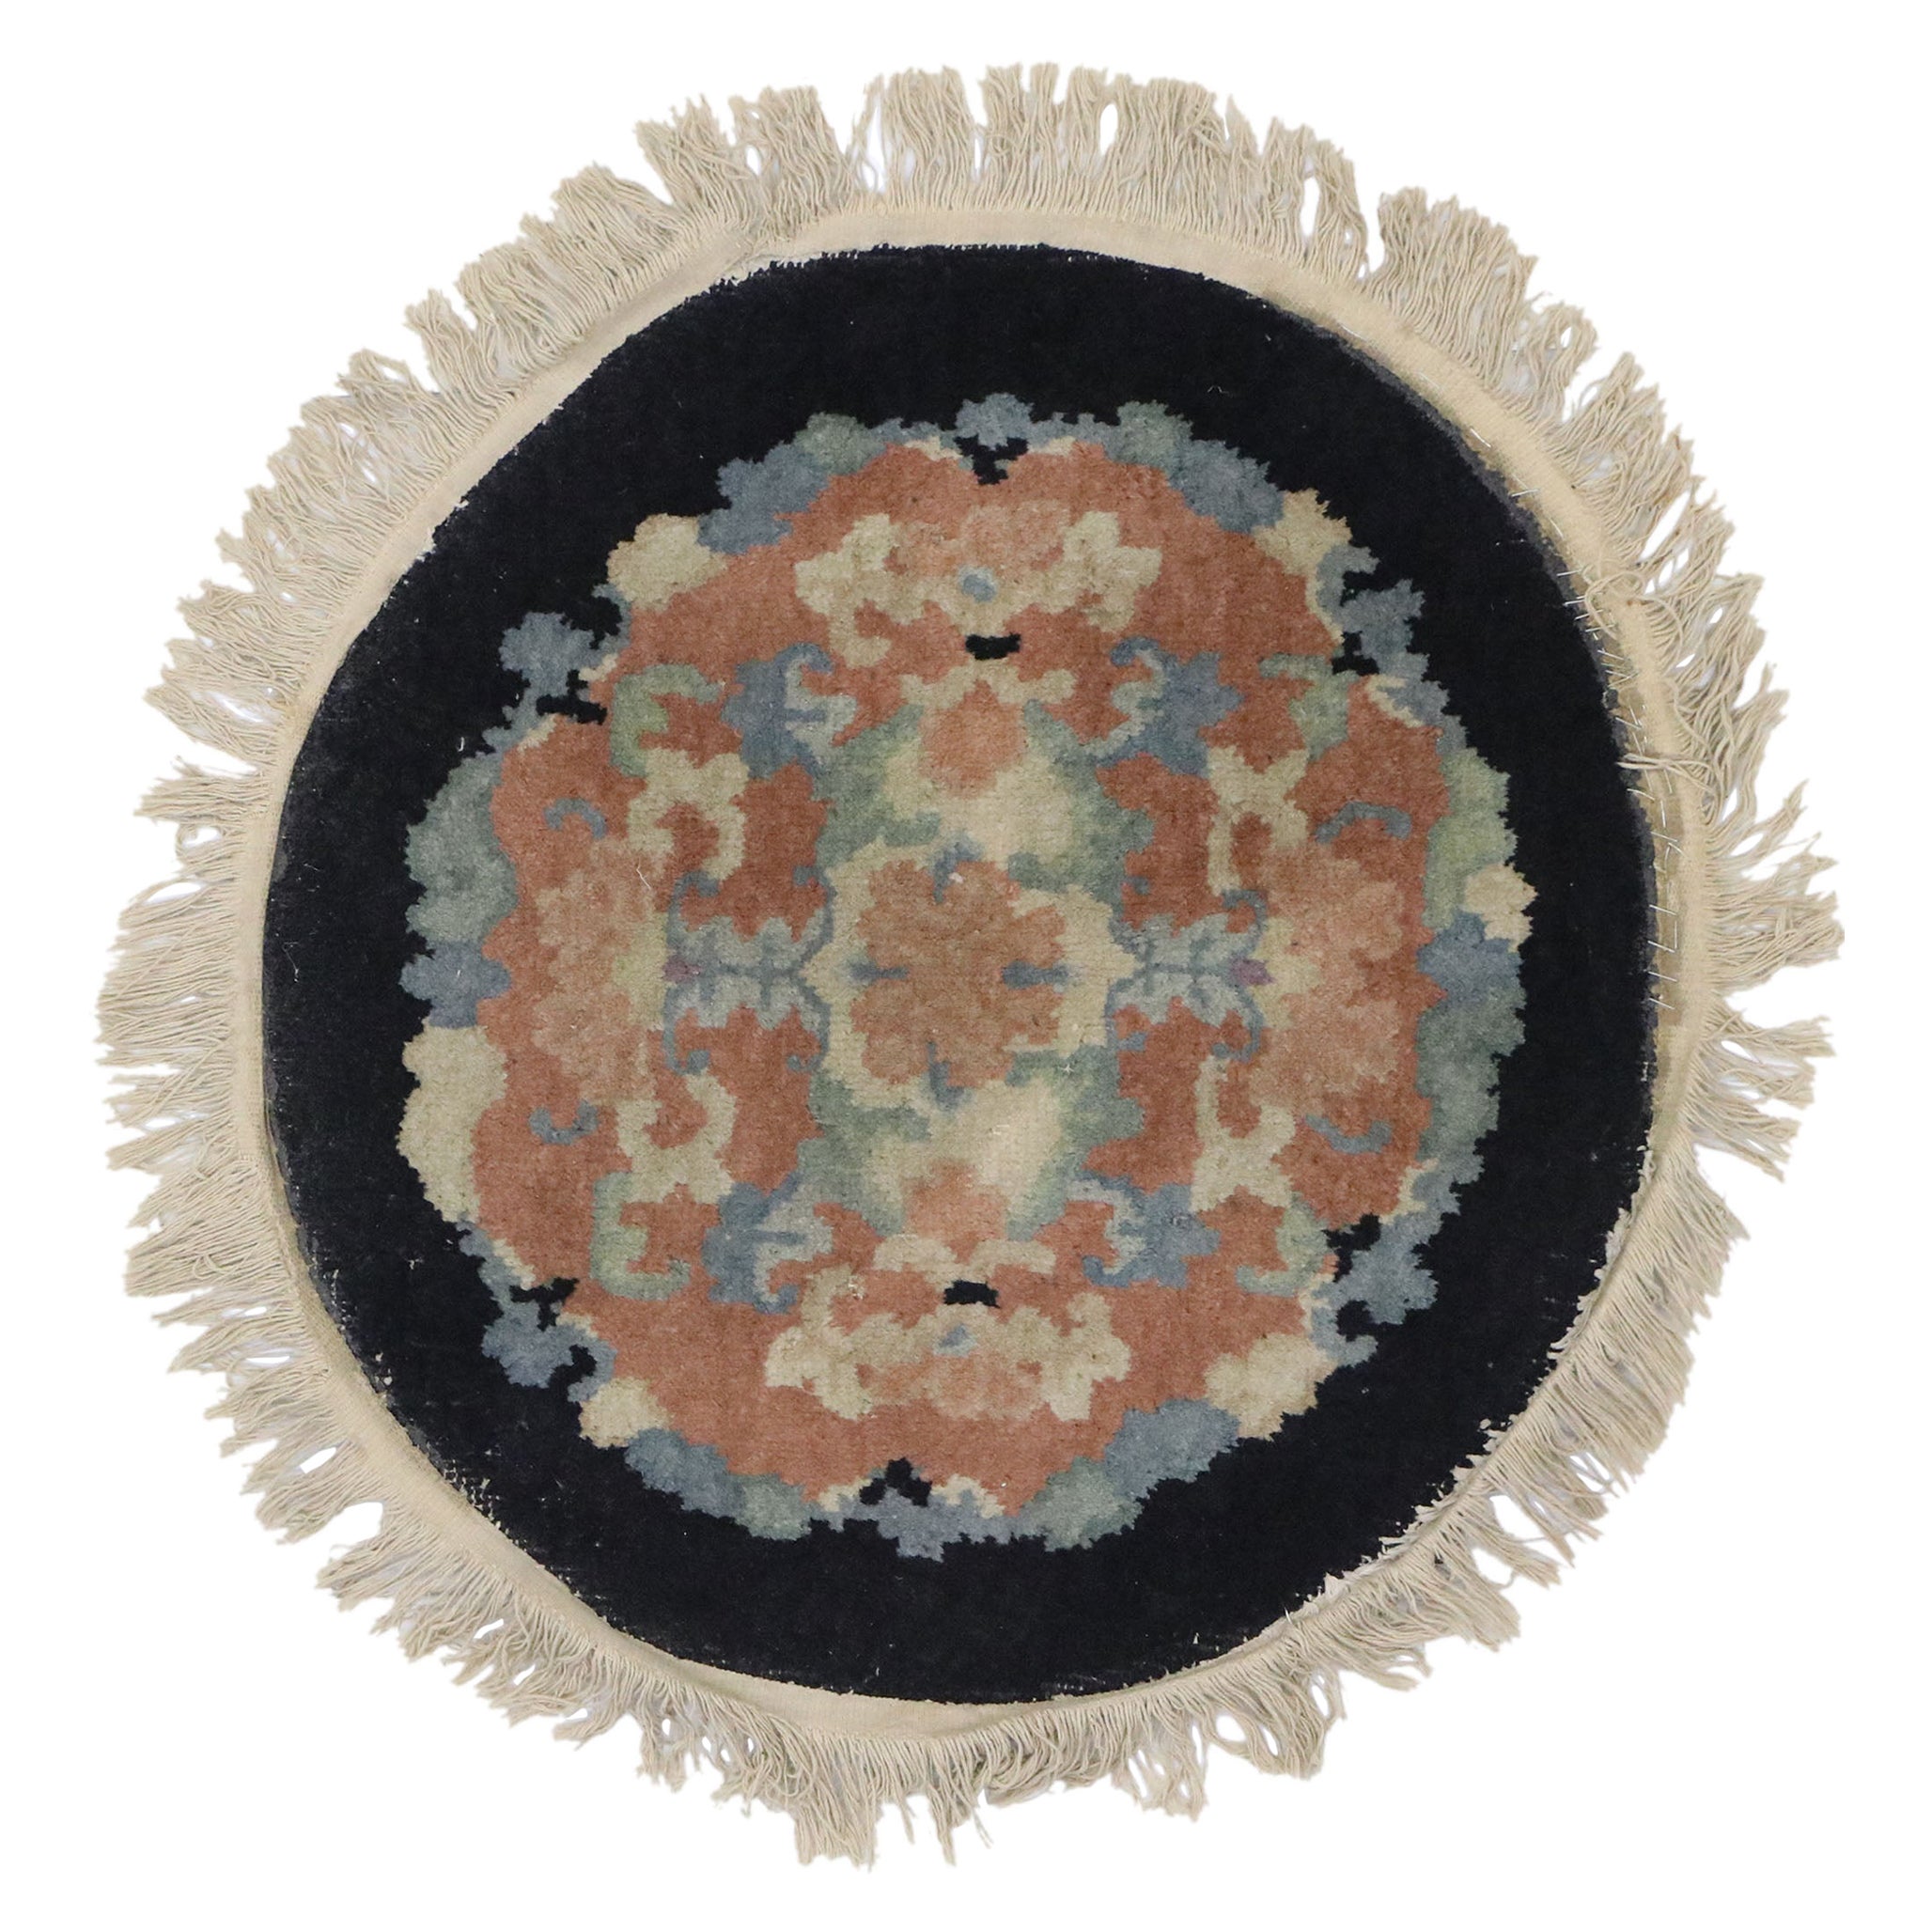 Antique Chinese Art Deco Round Rug with European Influenced Chinoiserie Style